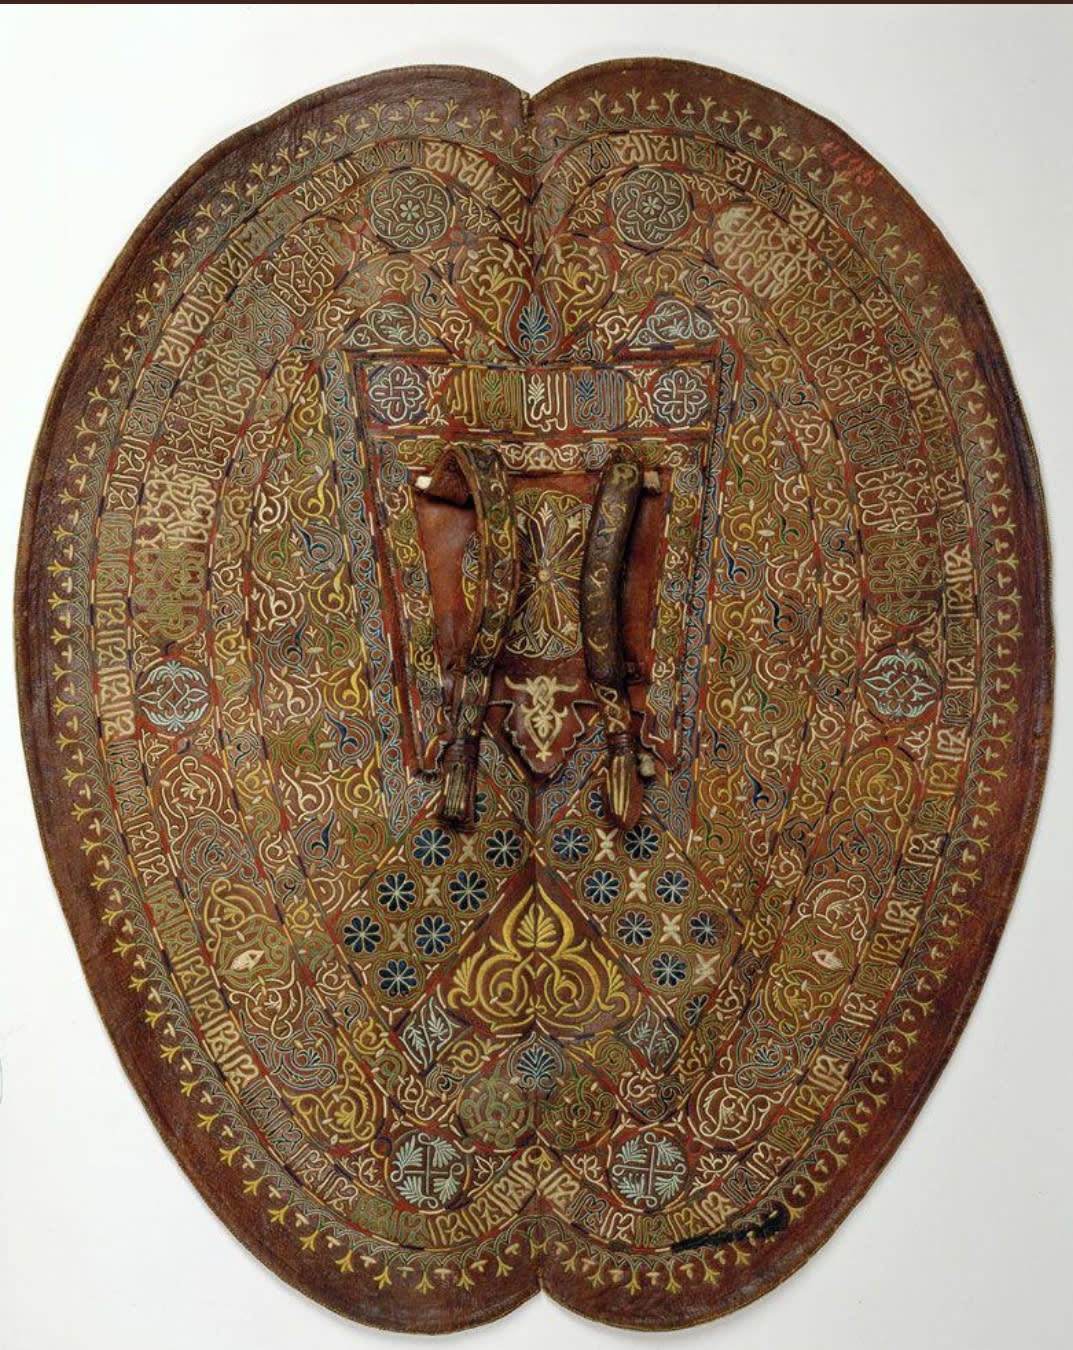 A Berber leather shield from 11th century used by the Moorish horsemen .